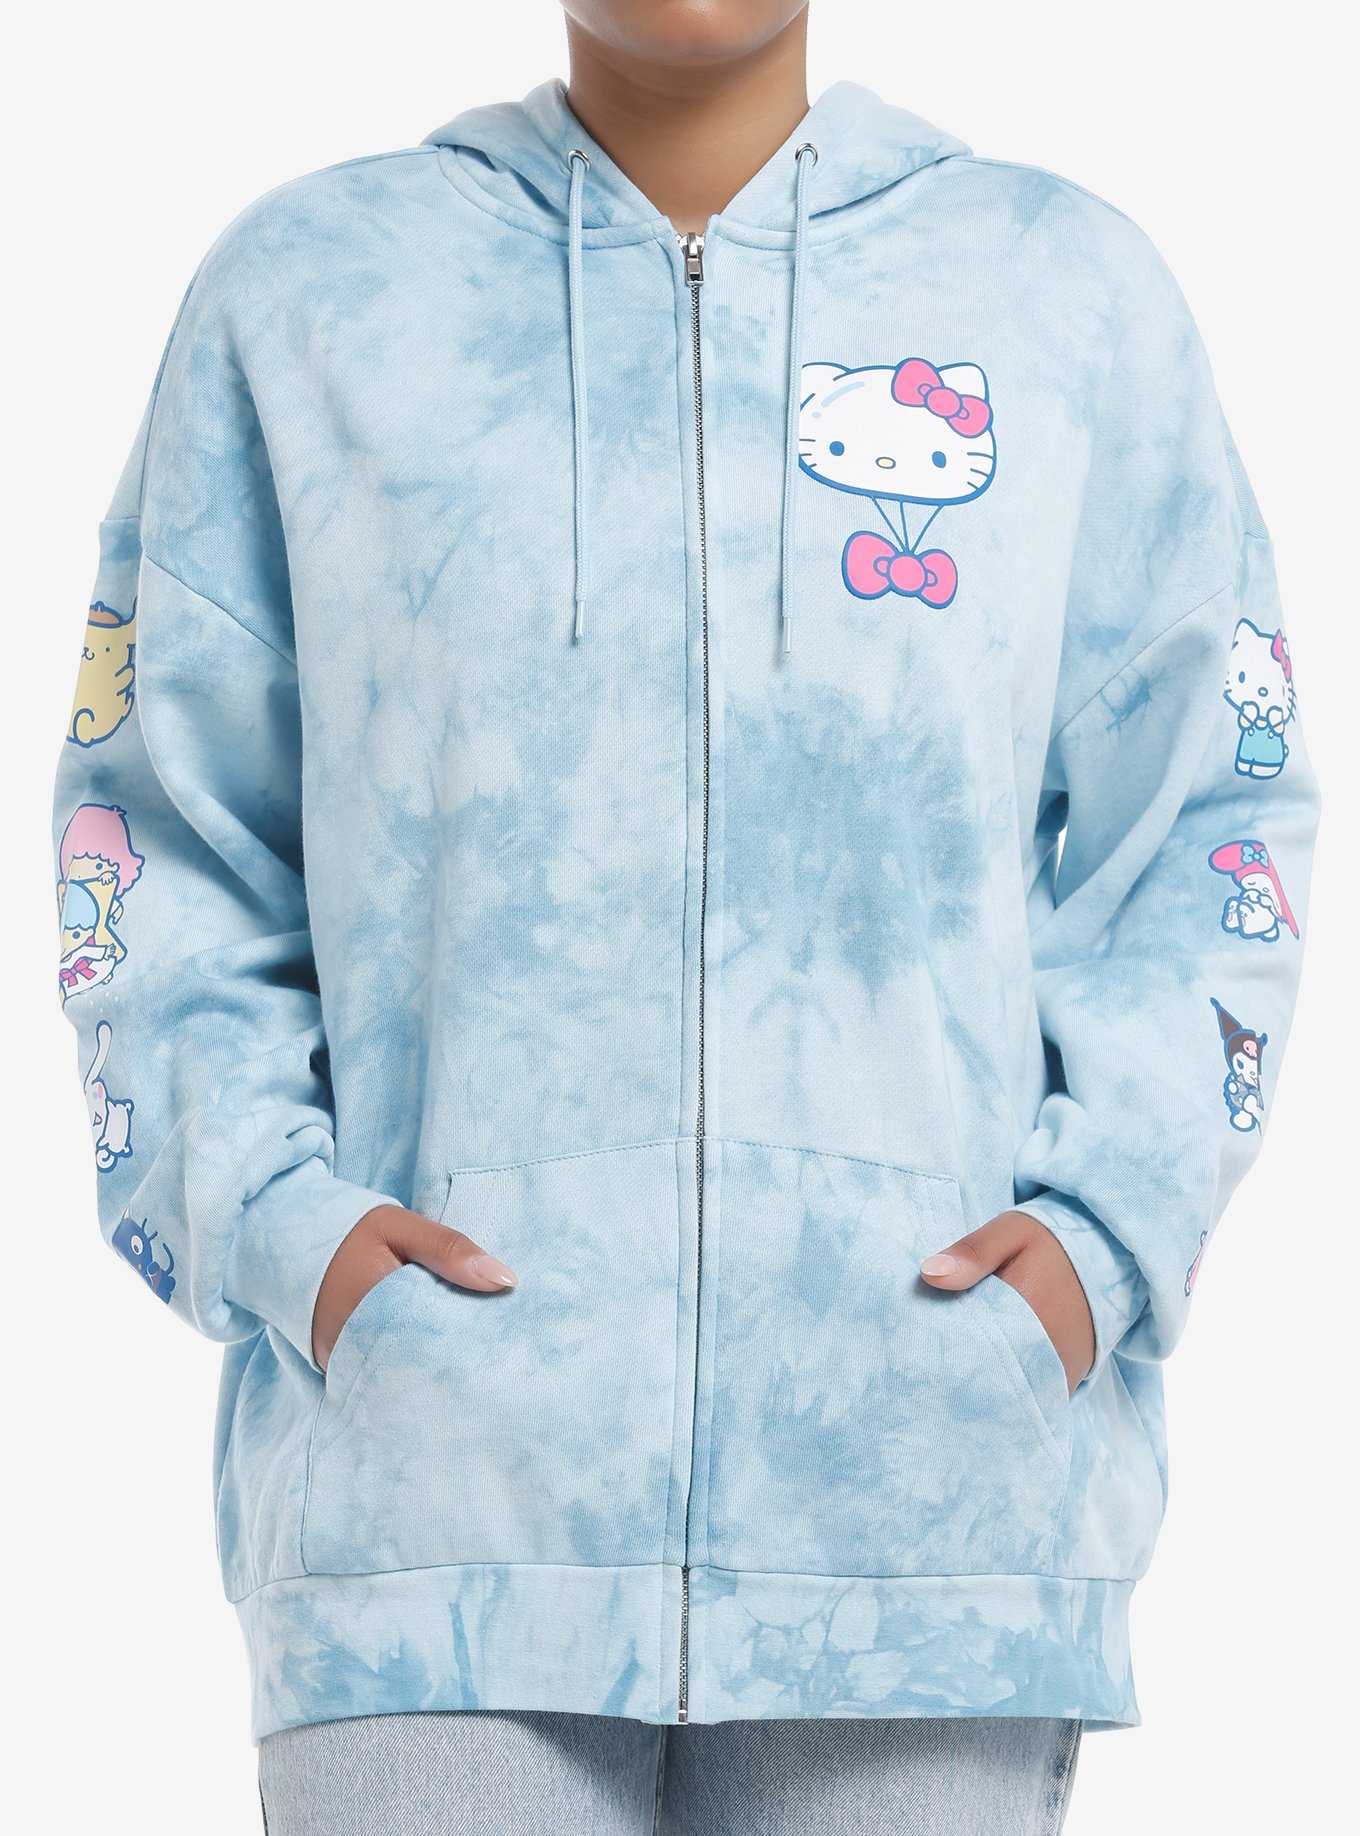 Hello Kitty And Friends Balloon Tie-Dye Girls Oversized Hoodie, , hi-res